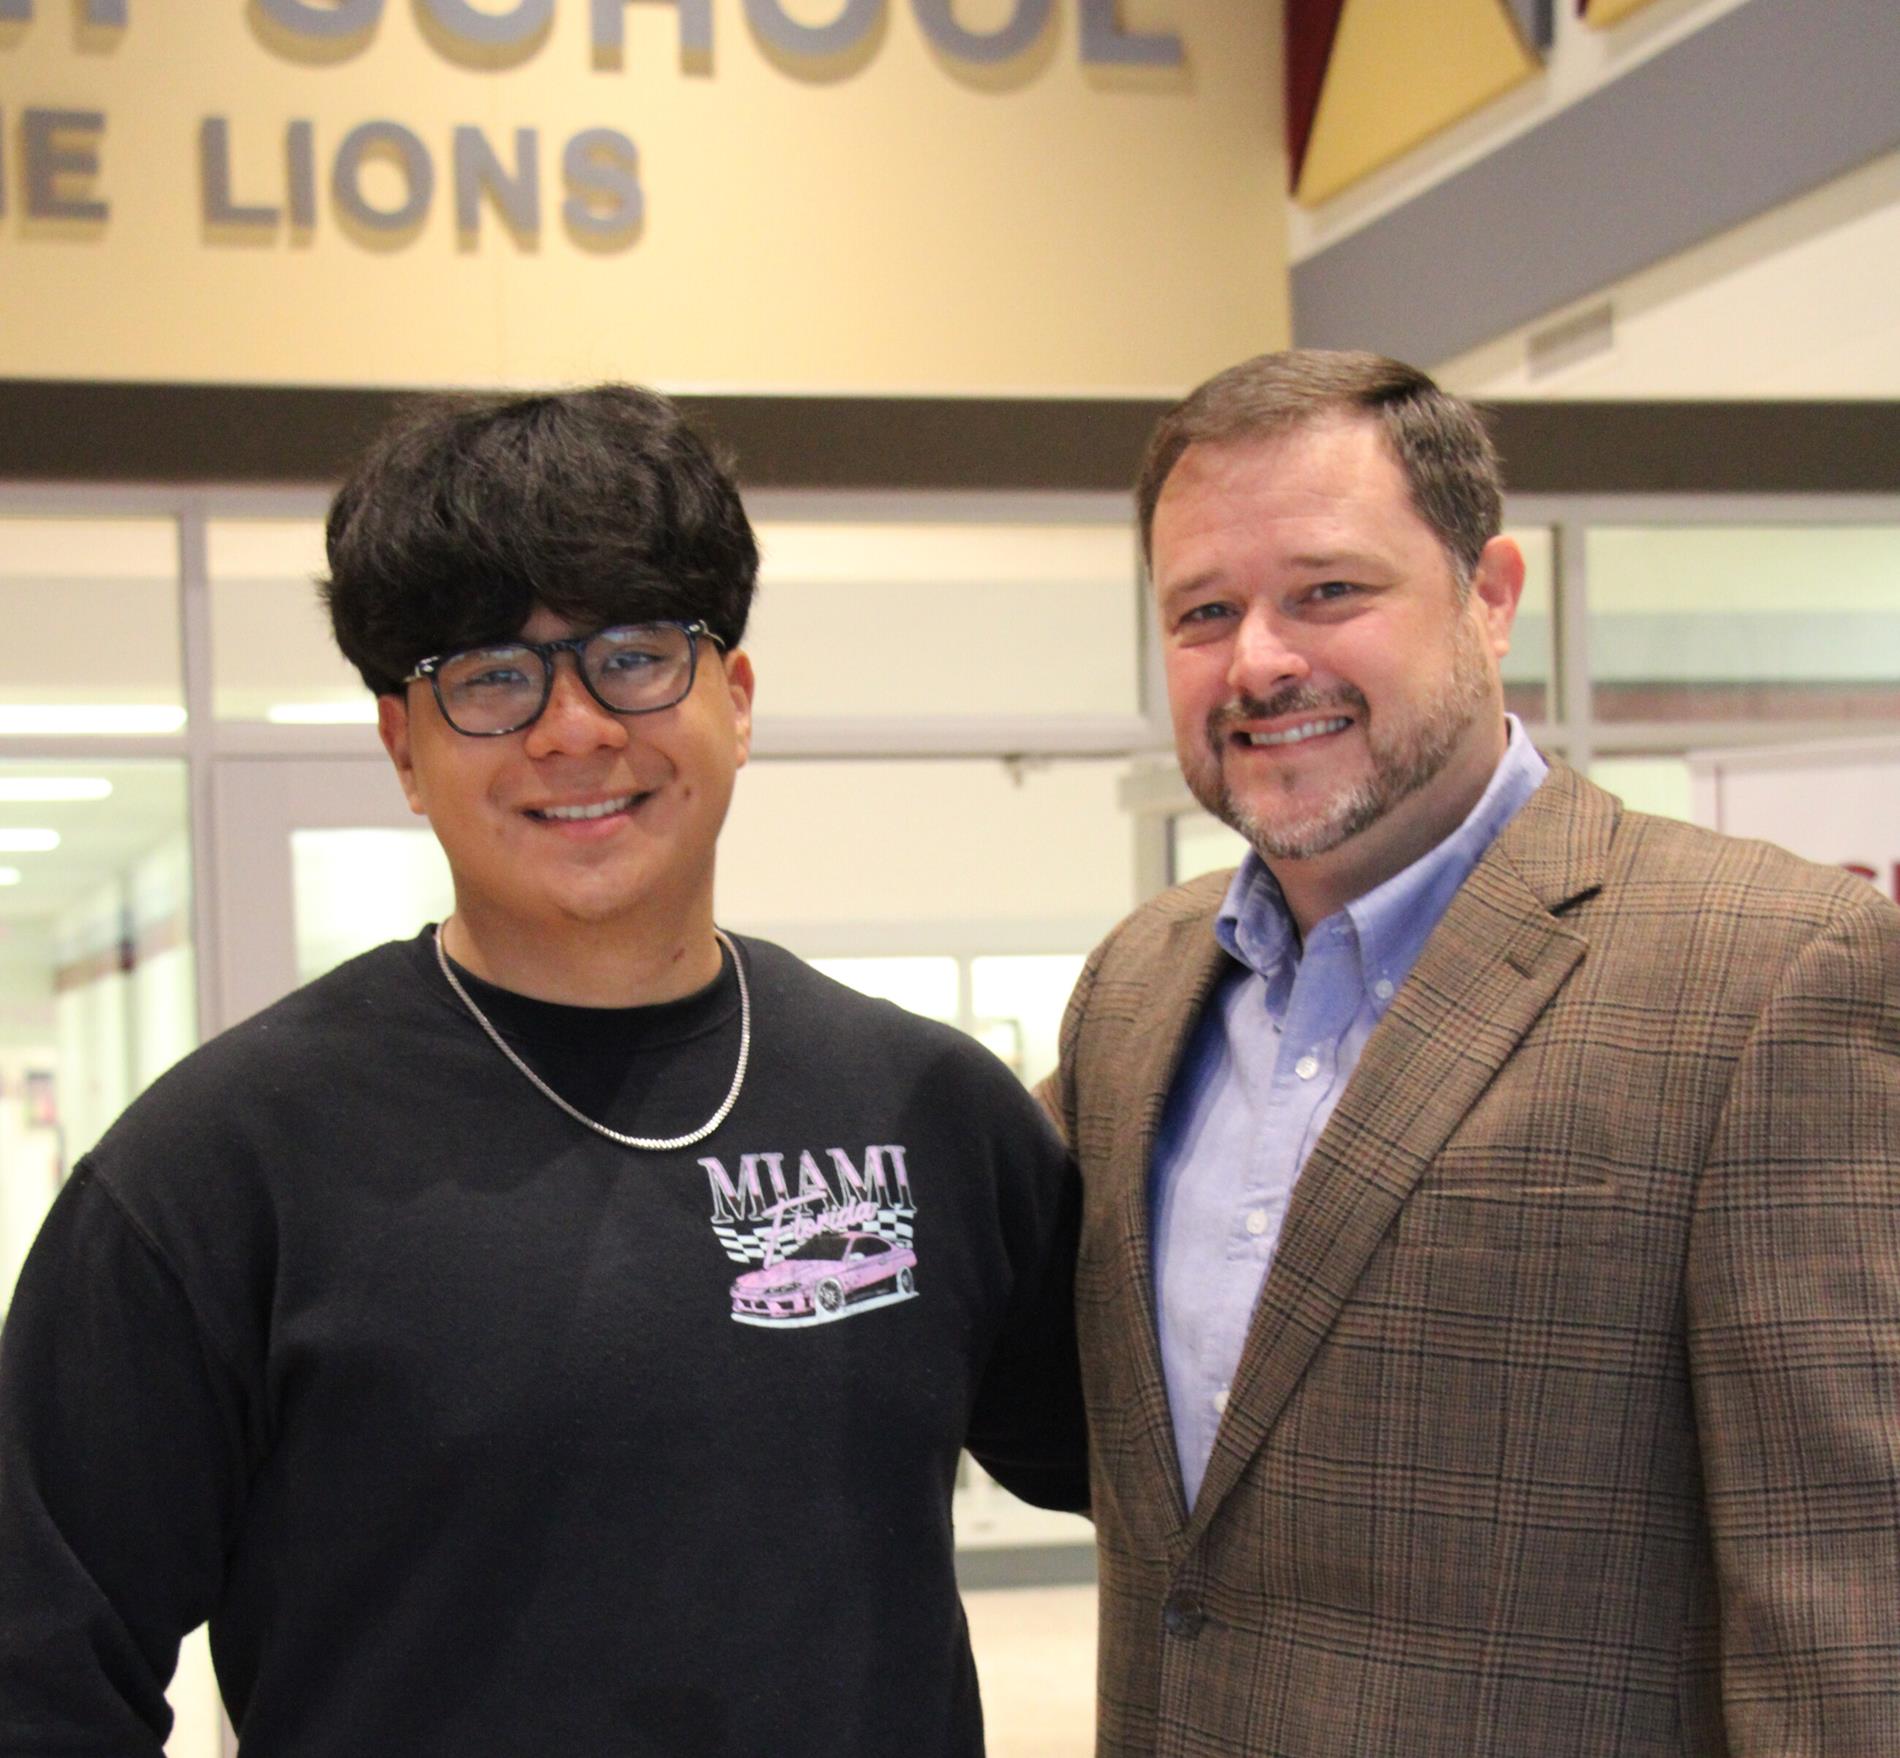 Central High School Student selected as Governor’s Honors Program Finalist